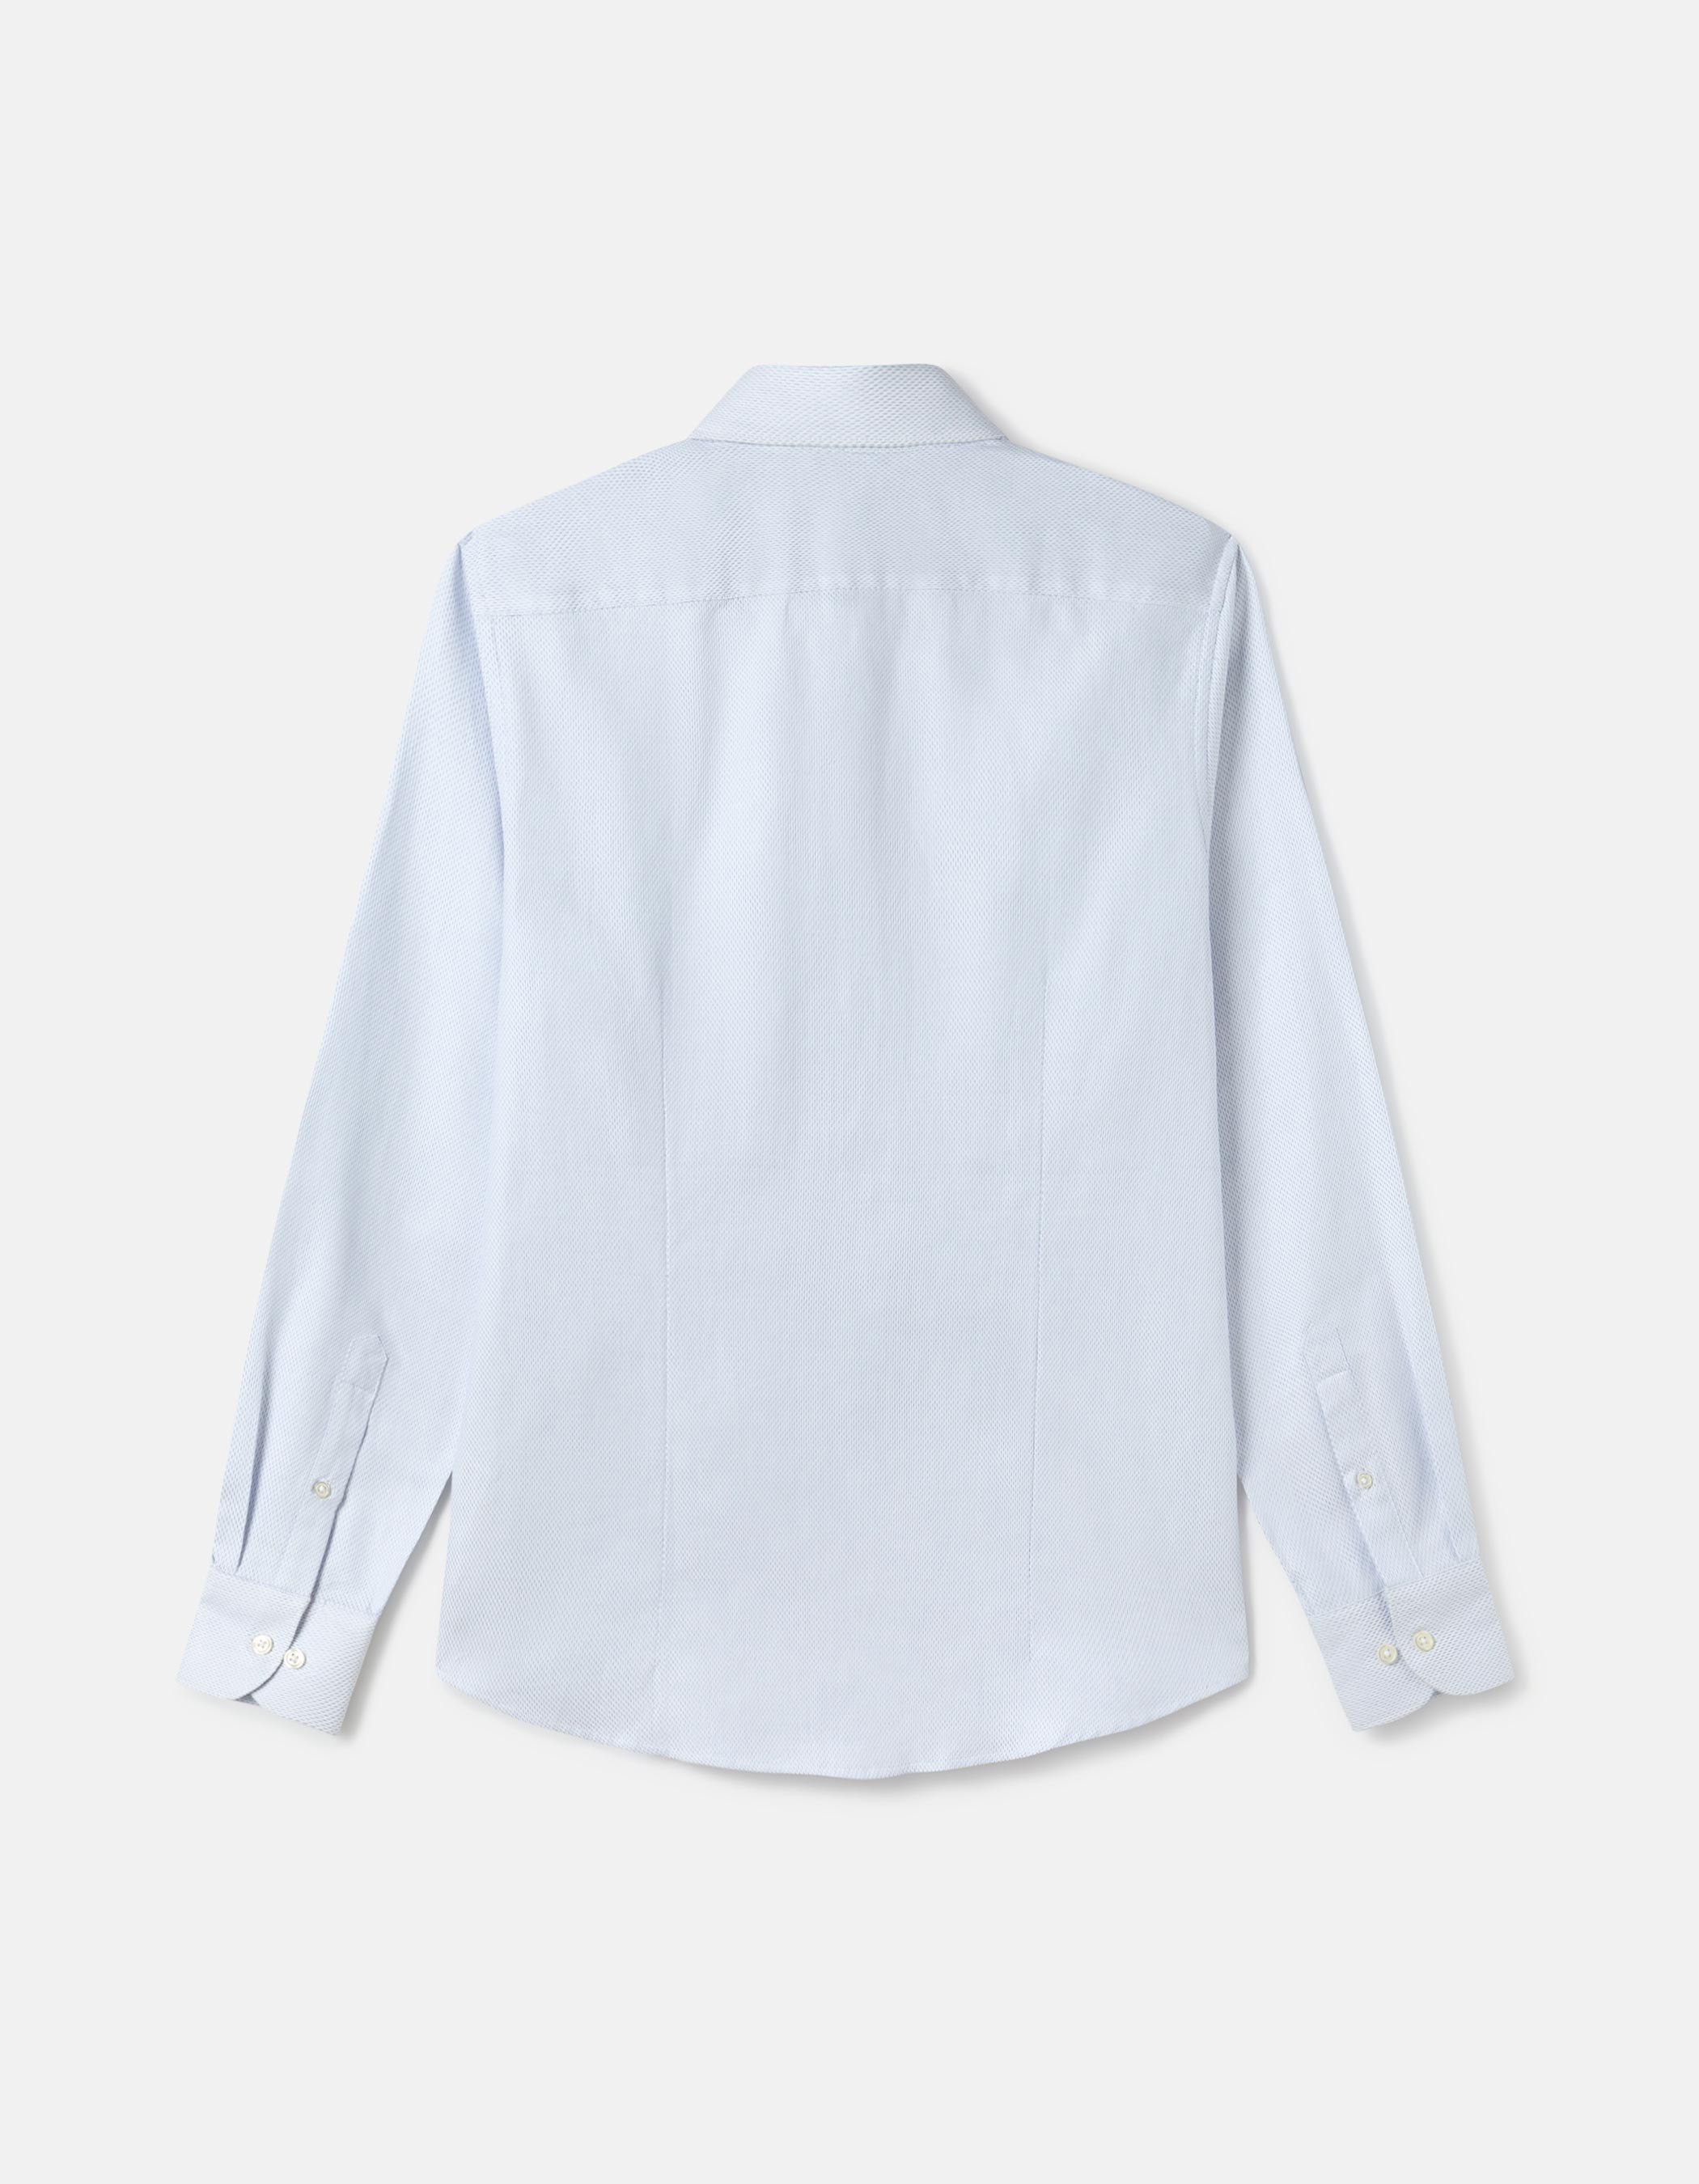 Micro-structured shirt 1